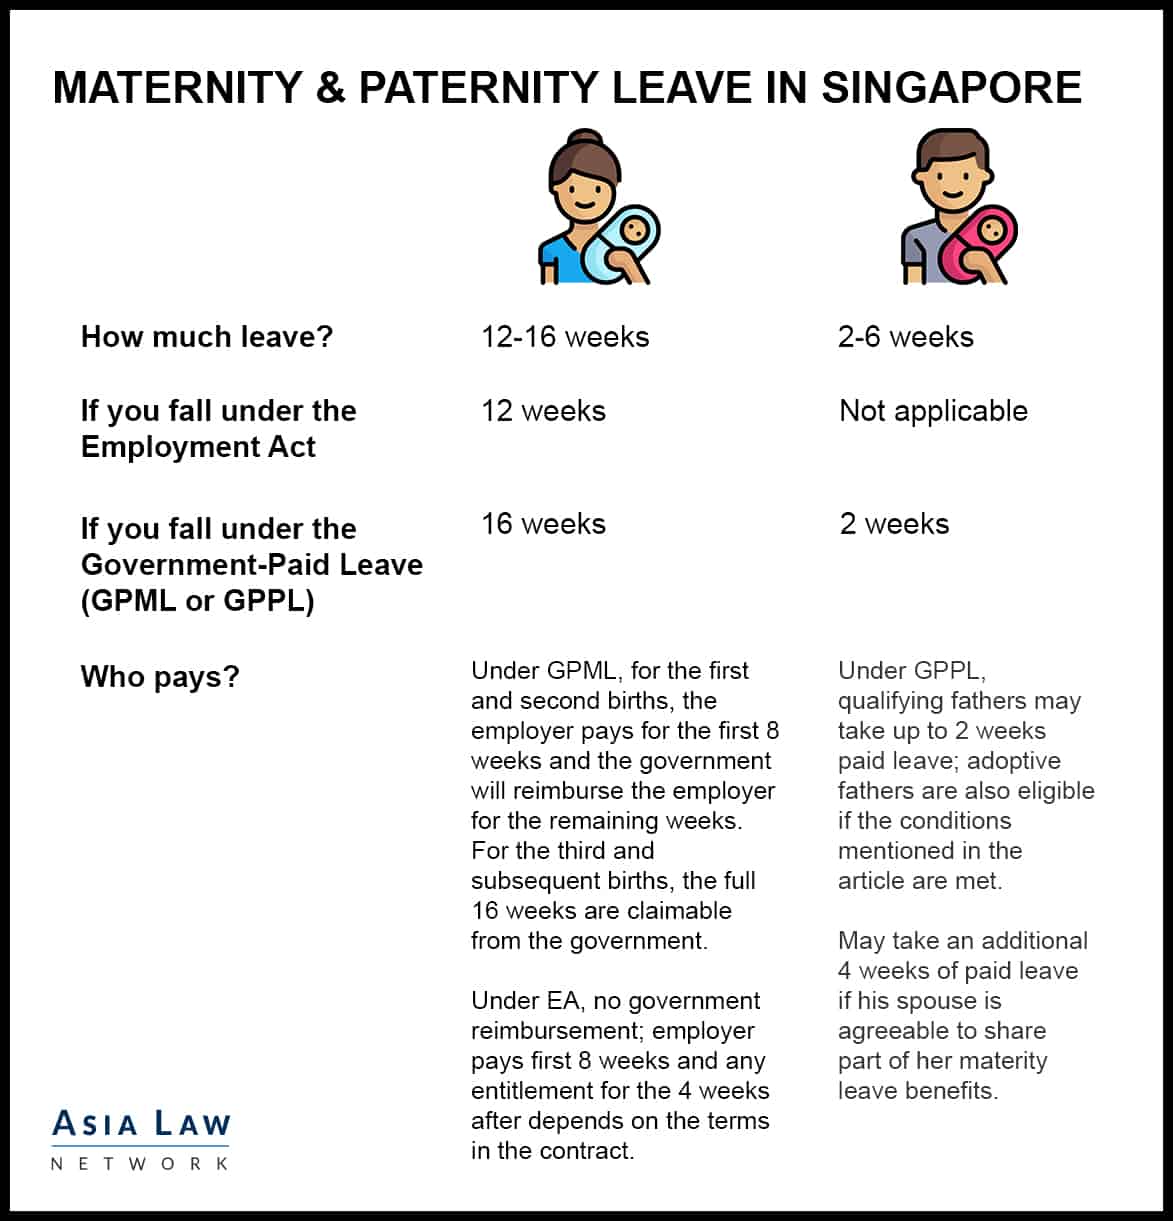 maternity-leave-paternity-leave-in-singapore-with-infographic